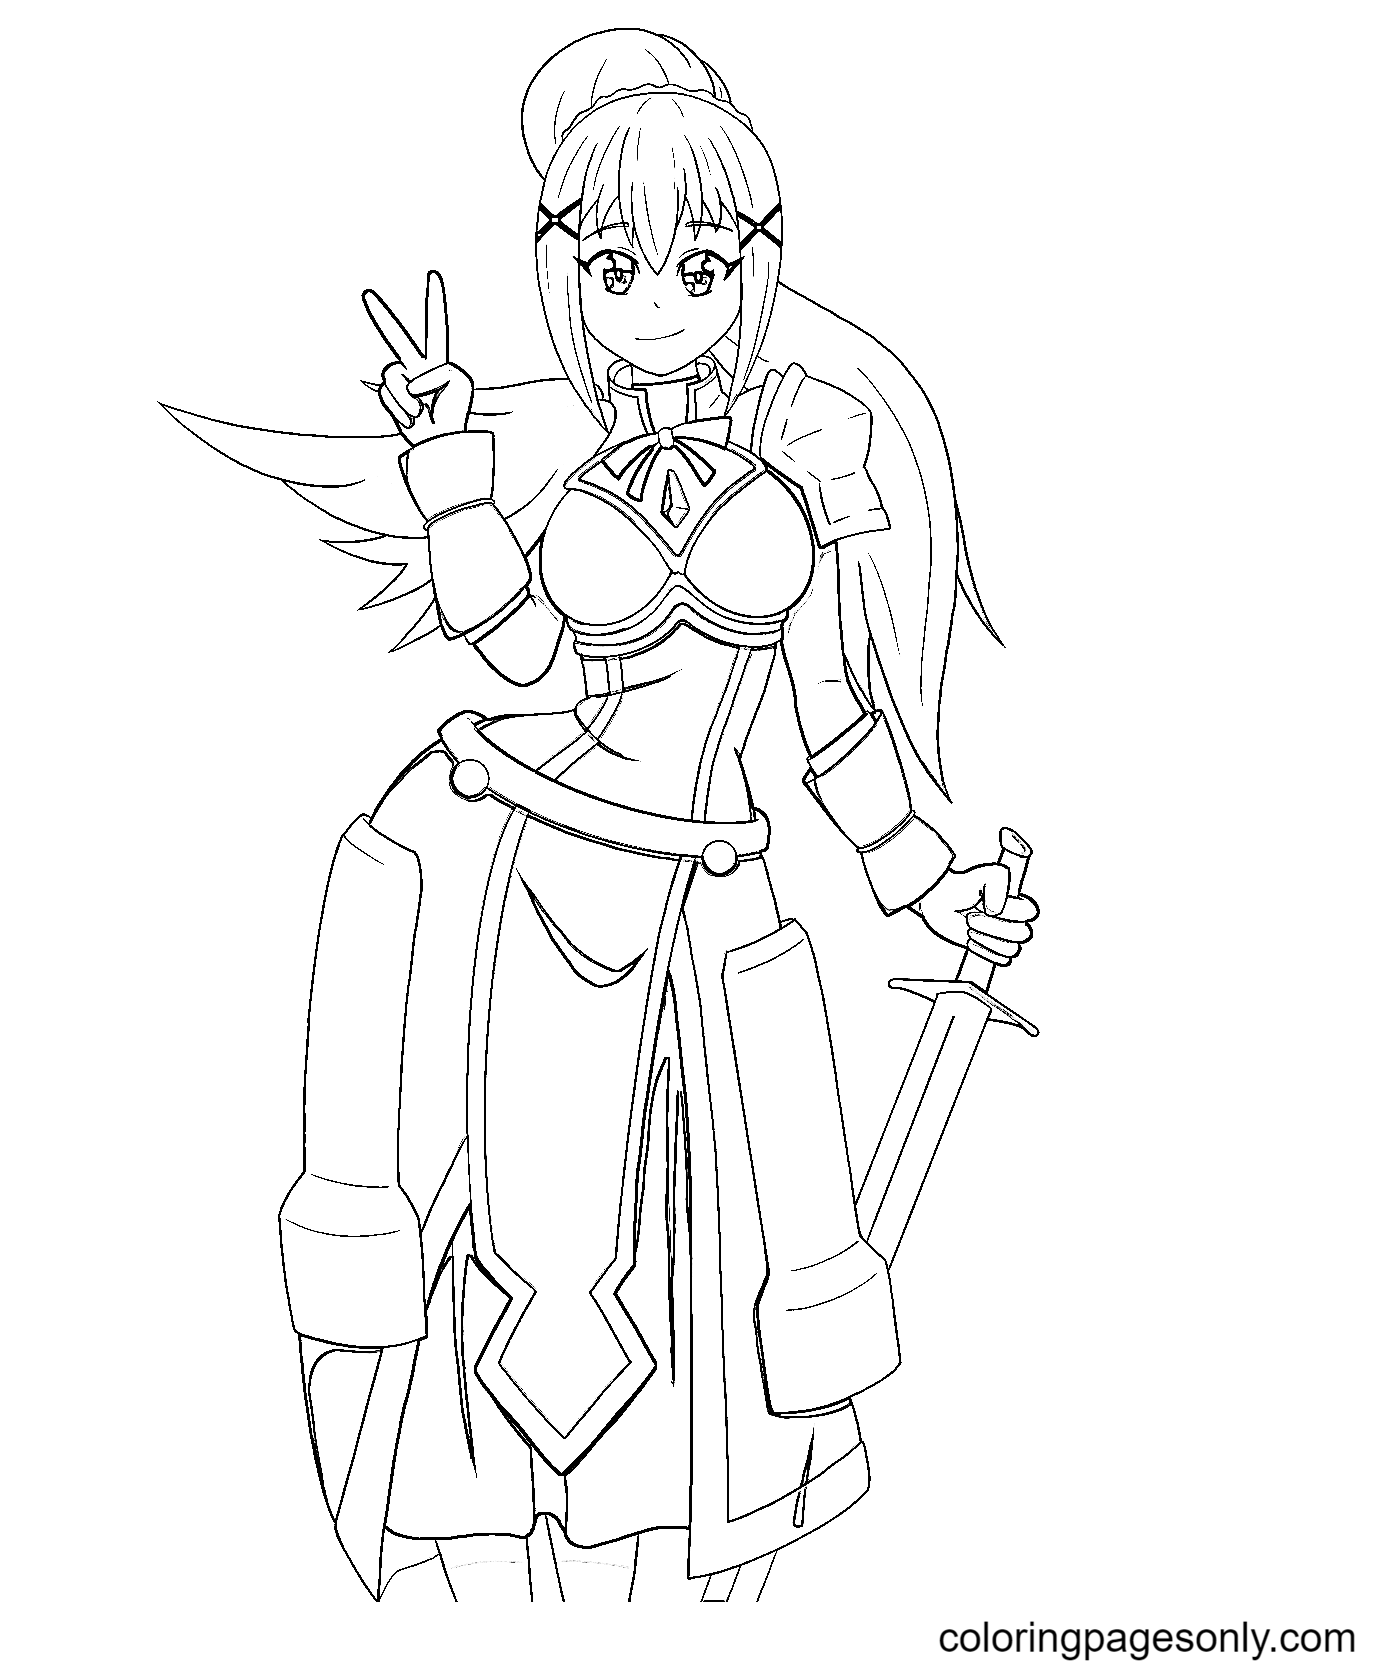 Darkness with Armor Coloring Page